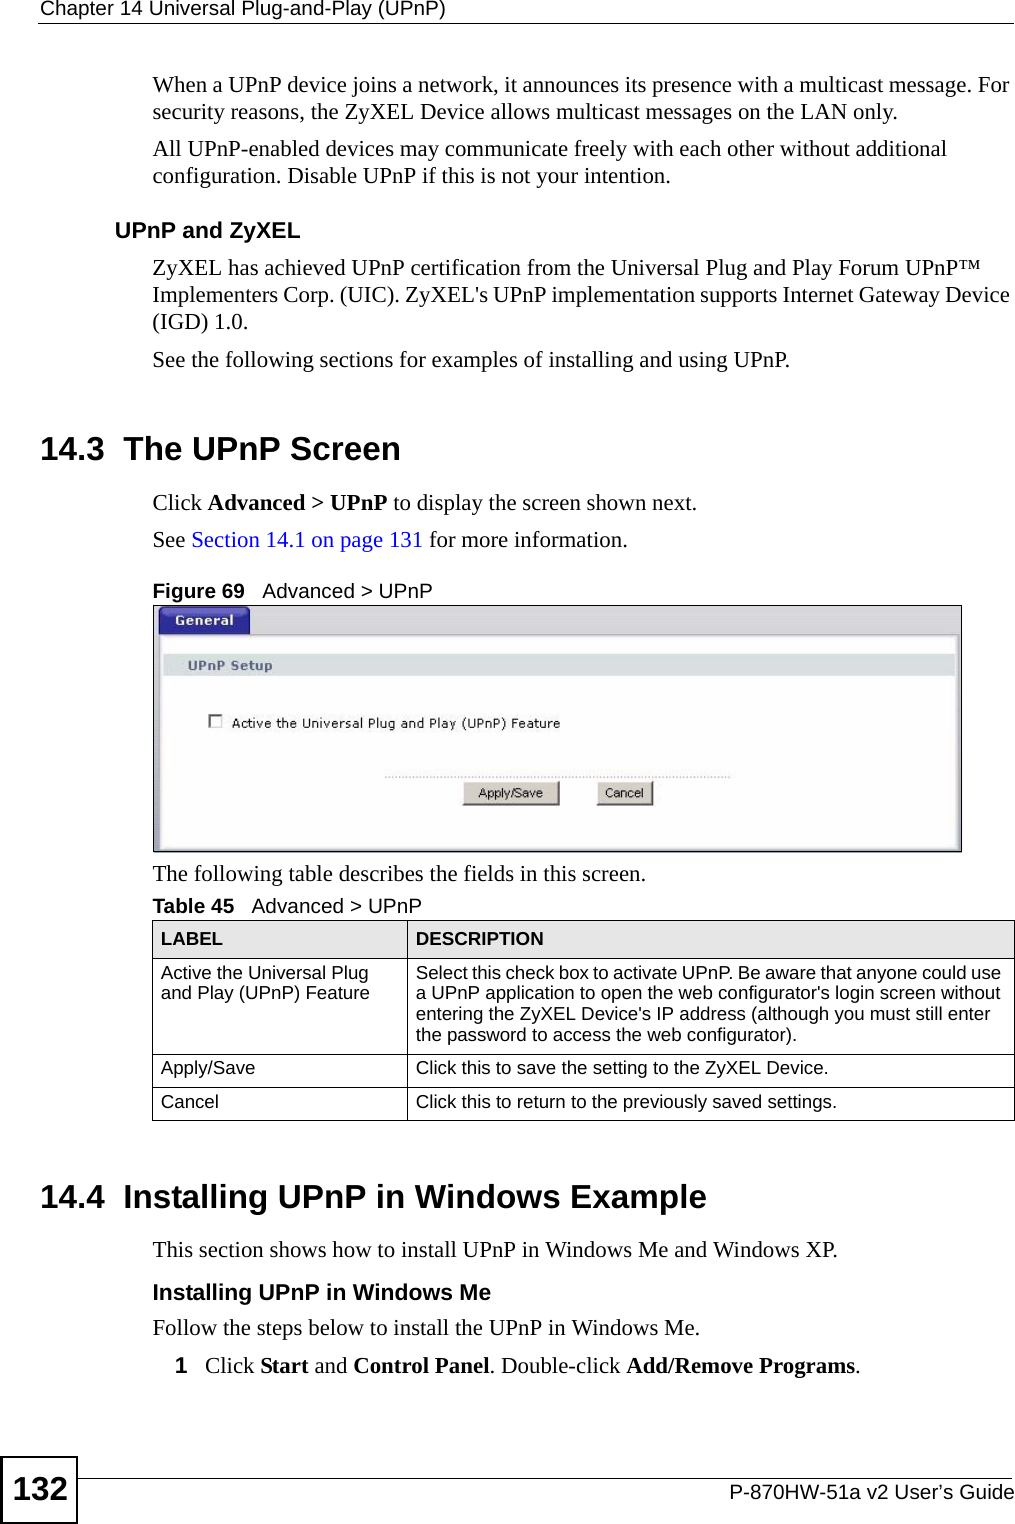 Chapter 14 Universal Plug-and-Play (UPnP)P-870HW-51a v2 User’s Guide132When a UPnP device joins a network, it announces its presence with a multicast message. For security reasons, the ZyXEL Device allows multicast messages on the LAN only.All UPnP-enabled devices may communicate freely with each other without additional configuration. Disable UPnP if this is not your intention. UPnP and ZyXELZyXEL has achieved UPnP certification from the Universal Plug and Play Forum UPnP™ Implementers Corp. (UIC). ZyXEL&apos;s UPnP implementation supports Internet Gateway Device (IGD) 1.0. See the following sections for examples of installing and using UPnP.14.3  The UPnP ScreenClick Advanced &gt; UPnP to display the screen shown next.See Section 14.1 on page 131 for more information. Figure 69   Advanced &gt; UPnP The following table describes the fields in this screen. 14.4  Installing UPnP in Windows ExampleThis section shows how to install UPnP in Windows Me and Windows XP. Installing UPnP in Windows MeFollow the steps below to install the UPnP in Windows Me. 1Click Start and Control Panel. Double-click Add/Remove Programs.Table 45   Advanced &gt; UPnPLABEL DESCRIPTIONActive the Universal Plug and Play (UPnP) Feature Select this check box to activate UPnP. Be aware that anyone could use a UPnP application to open the web configurator&apos;s login screen without entering the ZyXEL Device&apos;s IP address (although you must still enter the password to access the web configurator).Apply/Save Click this to save the setting to the ZyXEL Device.Cancel Click this to return to the previously saved settings.